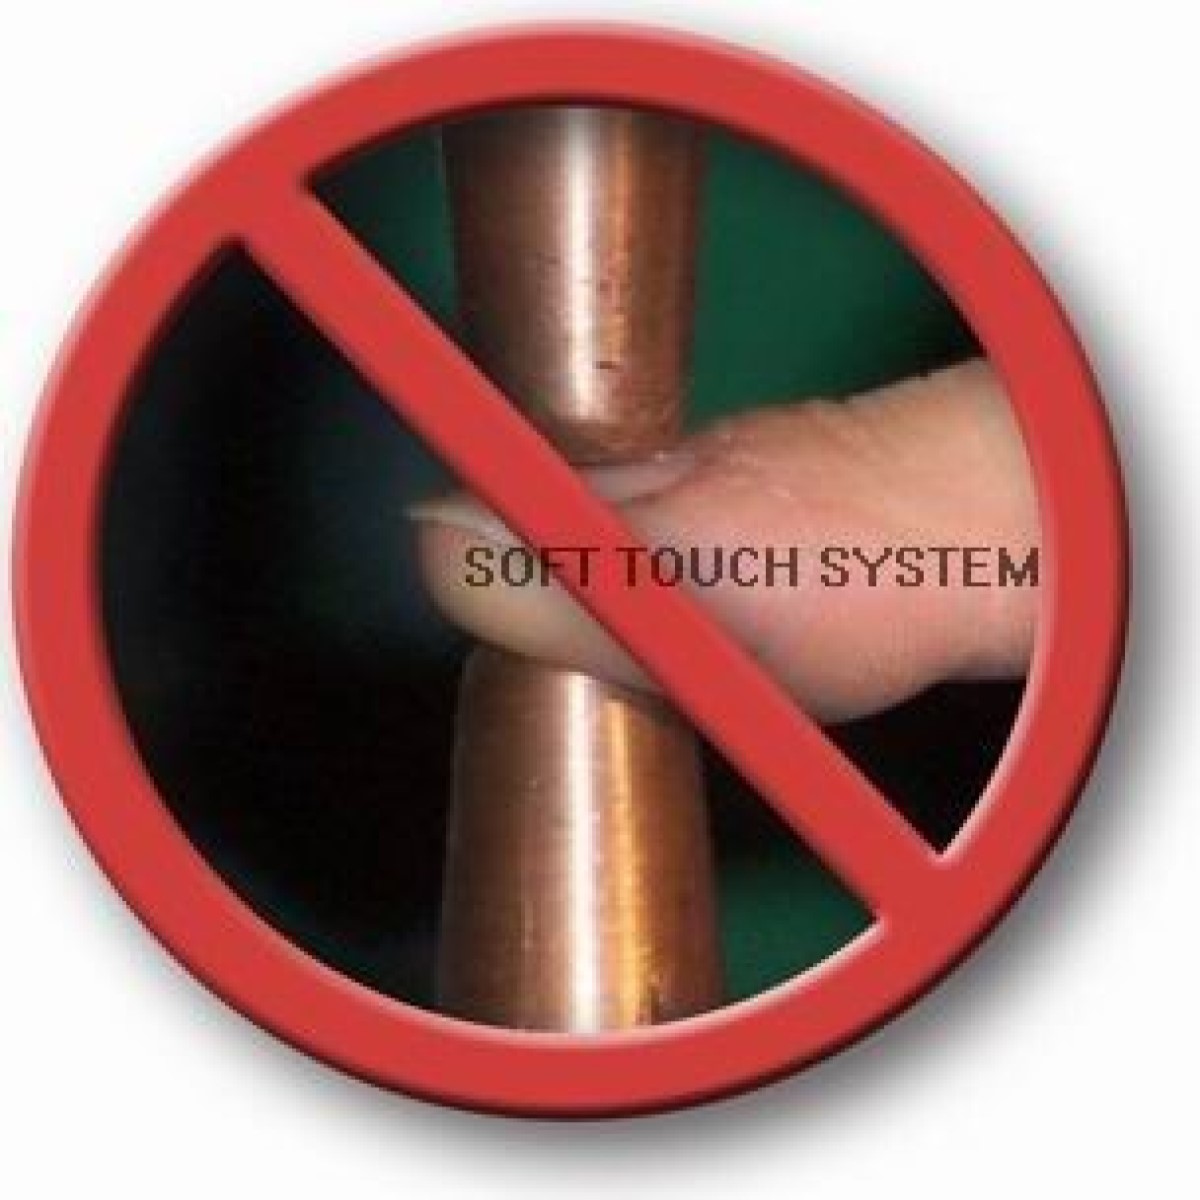 Soft touch system for welder